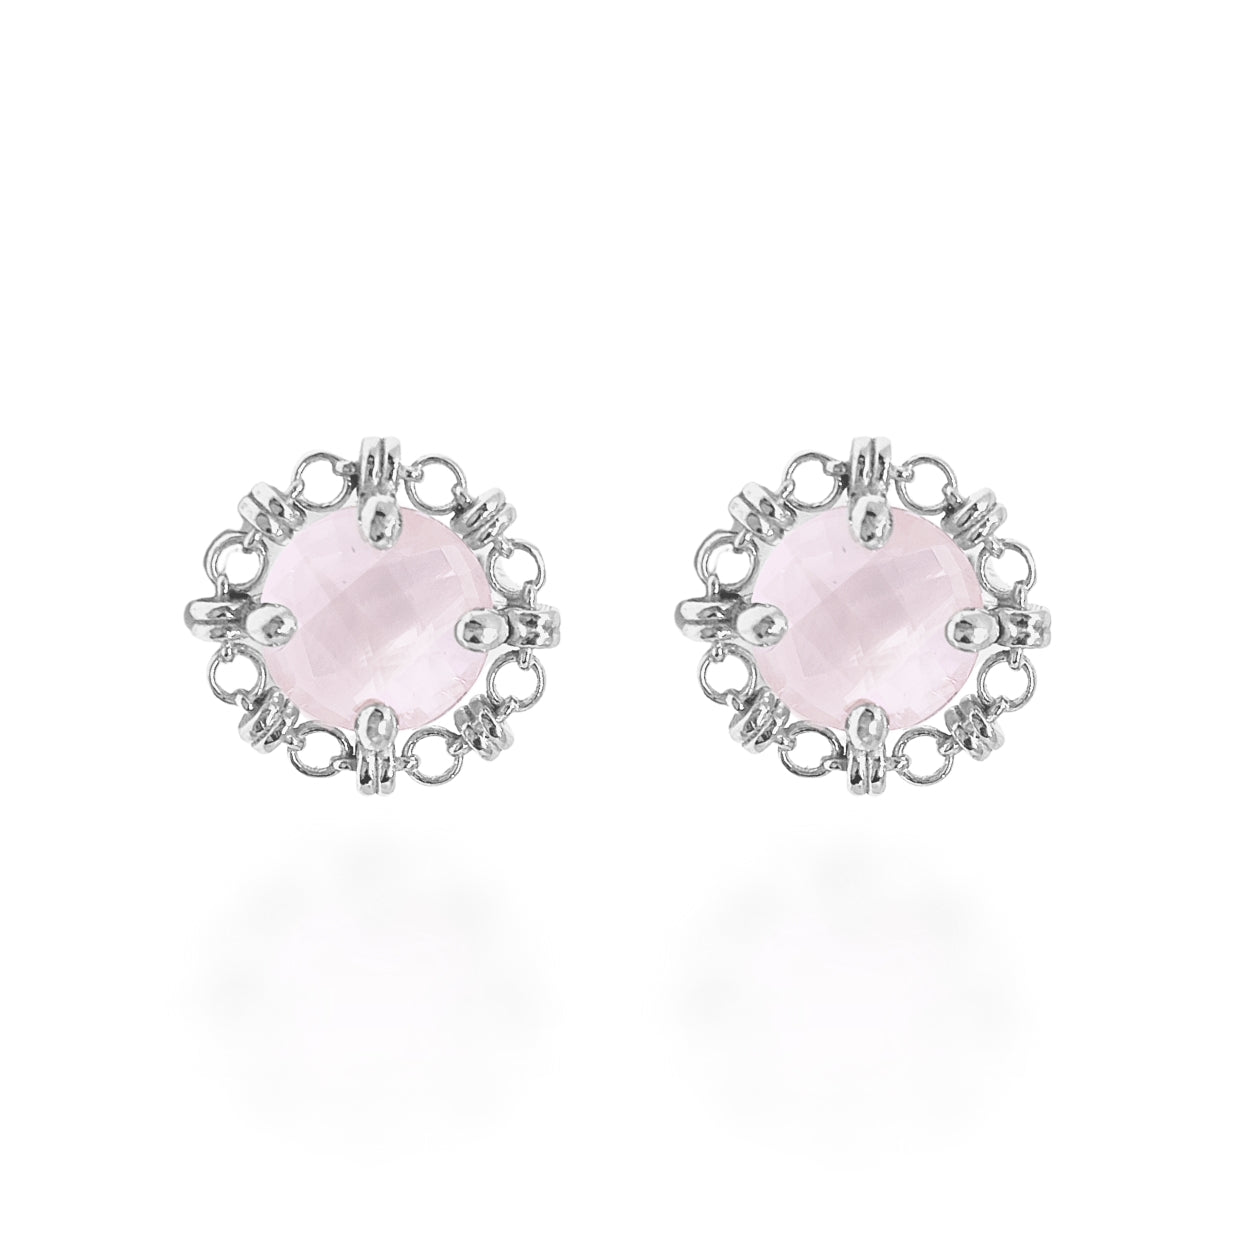 Mini Filary Stud Earrings in Silver with Rose Quartz